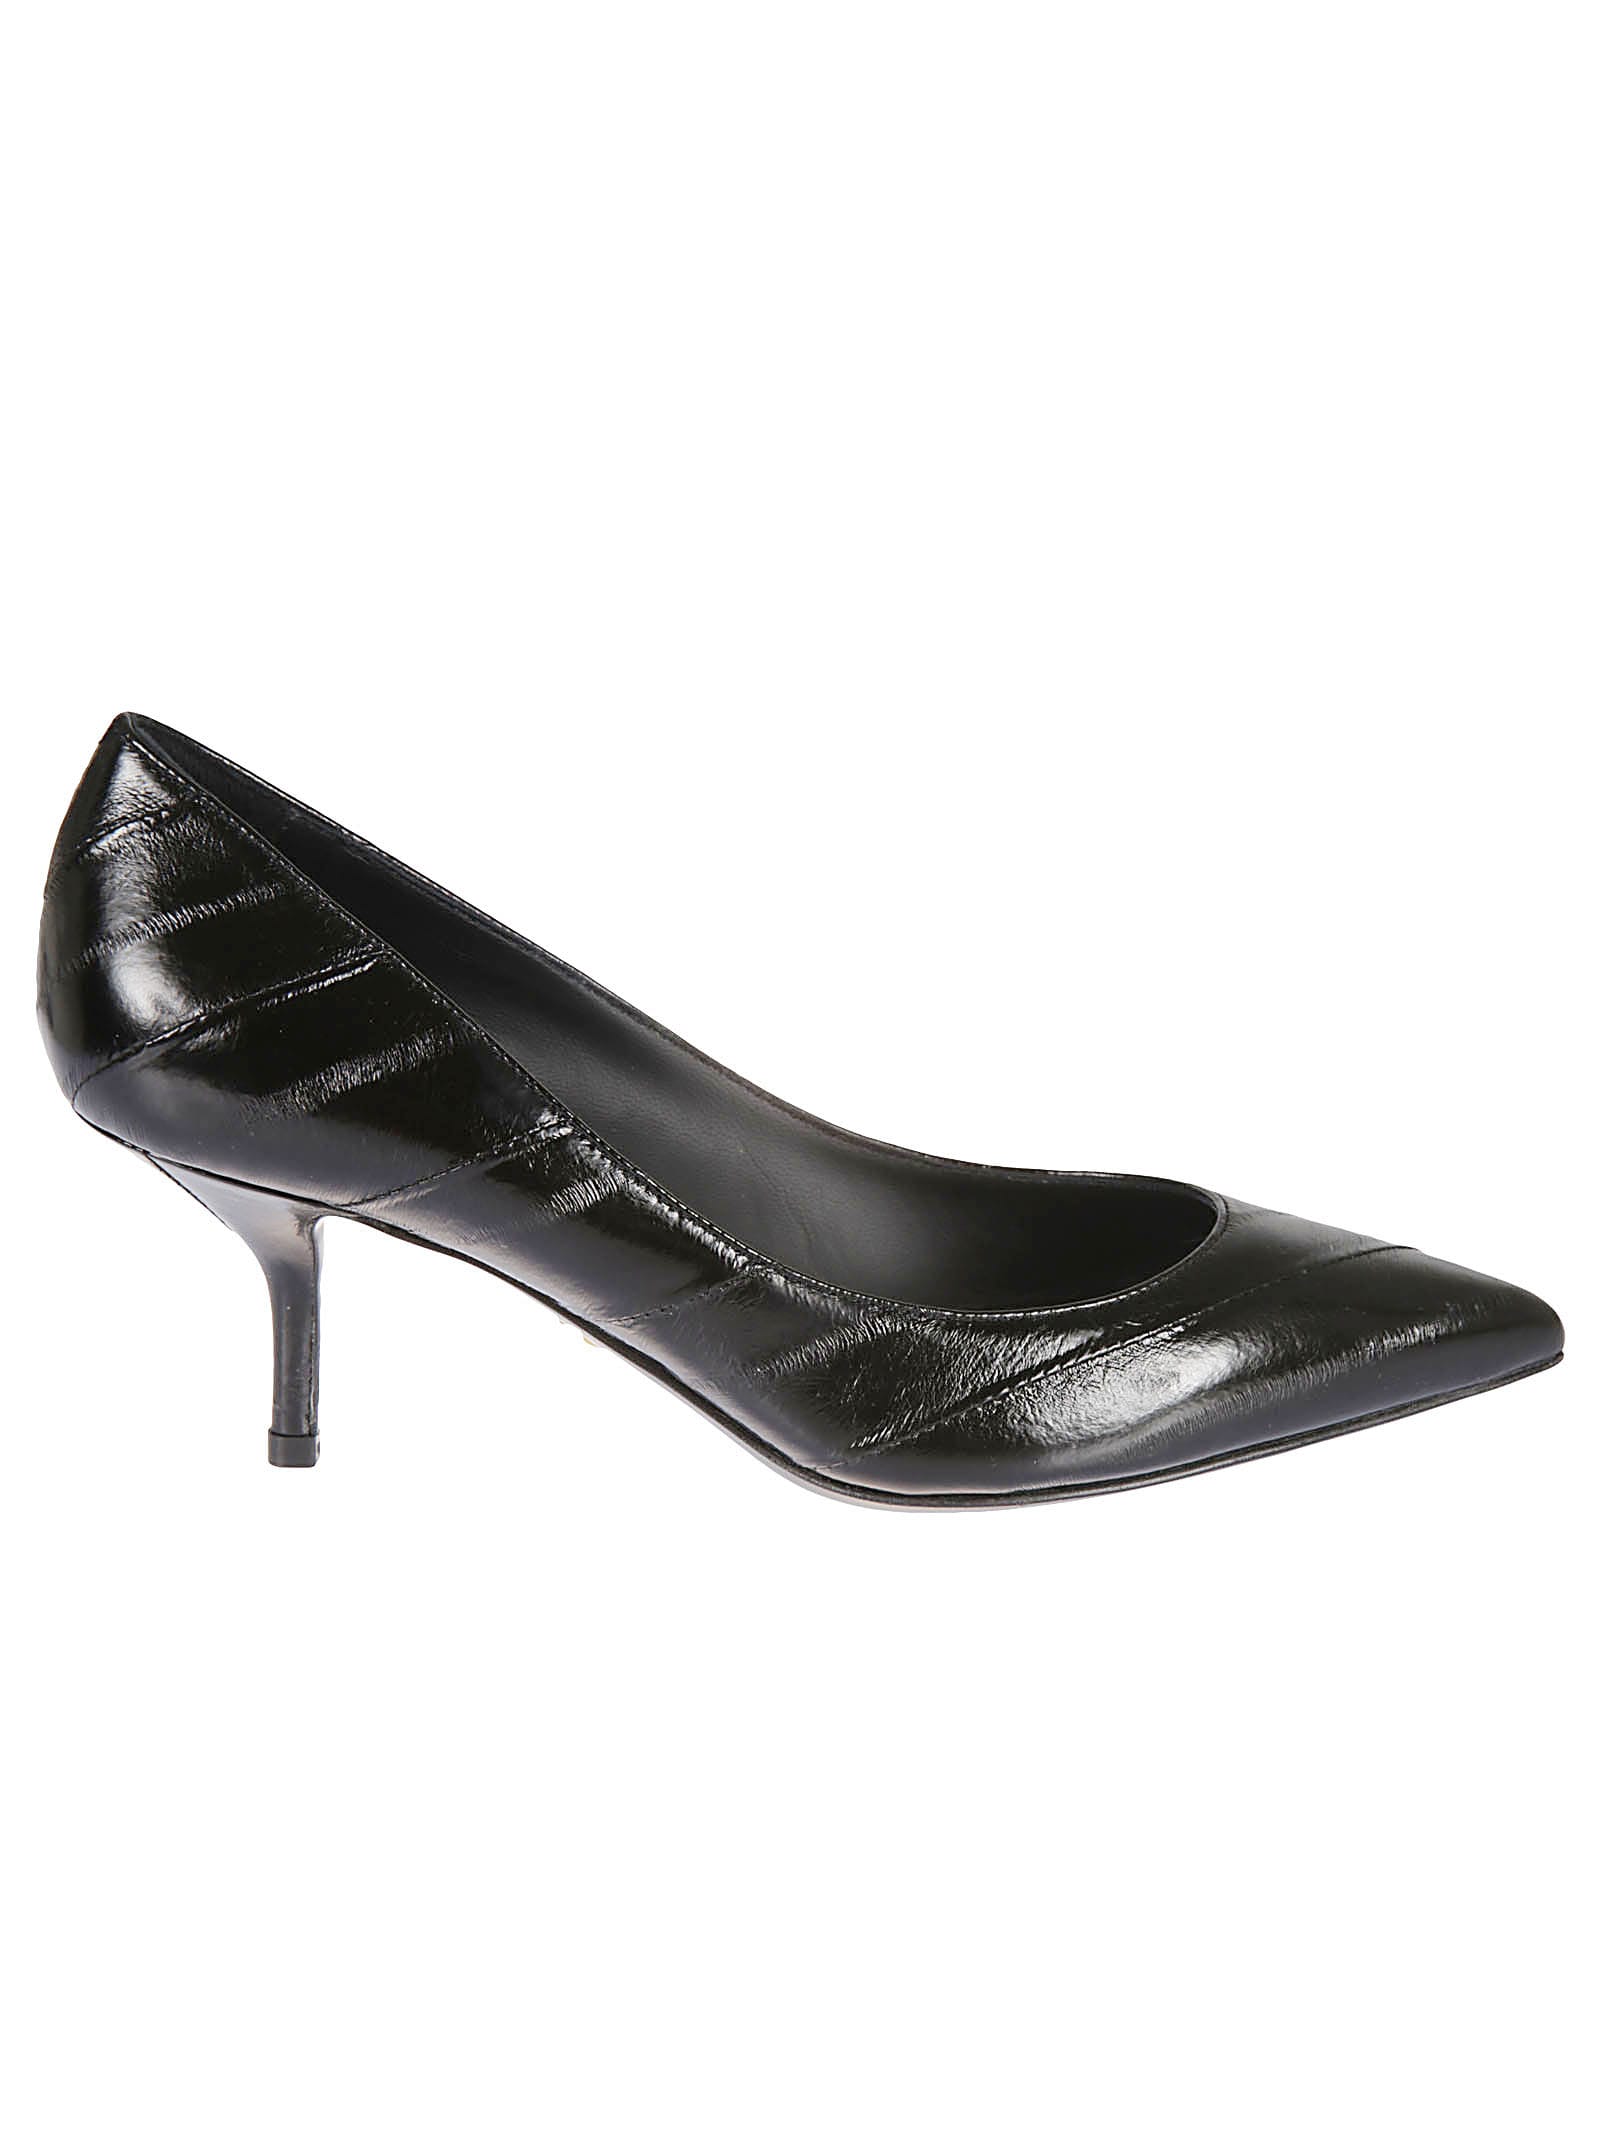 Dolce & Gabbana Pointed-toe Leather Pumps